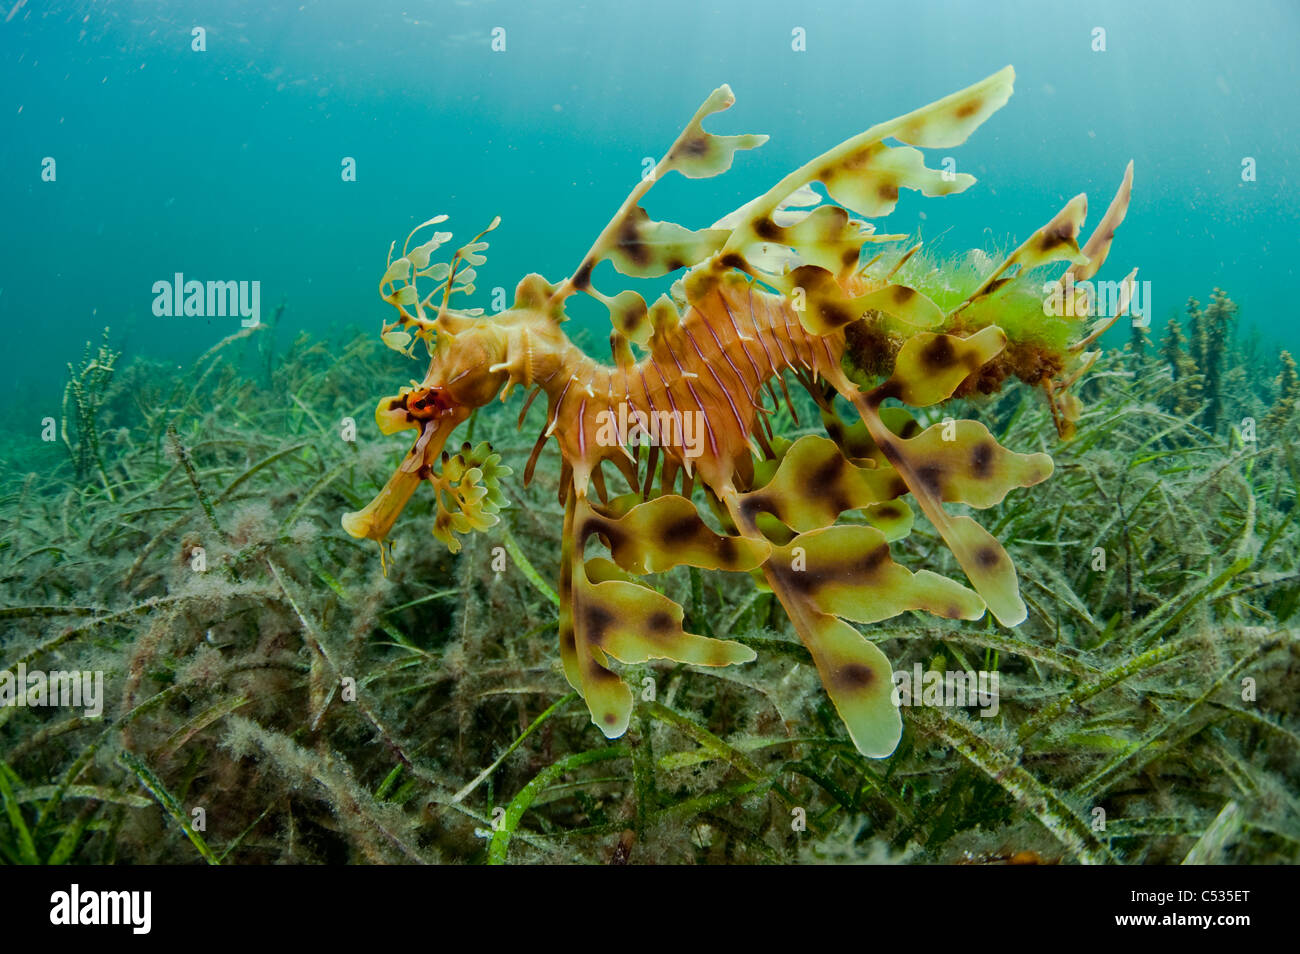 A male Leafy Sea Dragon (Phycodurus eques) swims over the sea grass and kelp near the jetty in Edithburgh, South Australia. Stock Photo